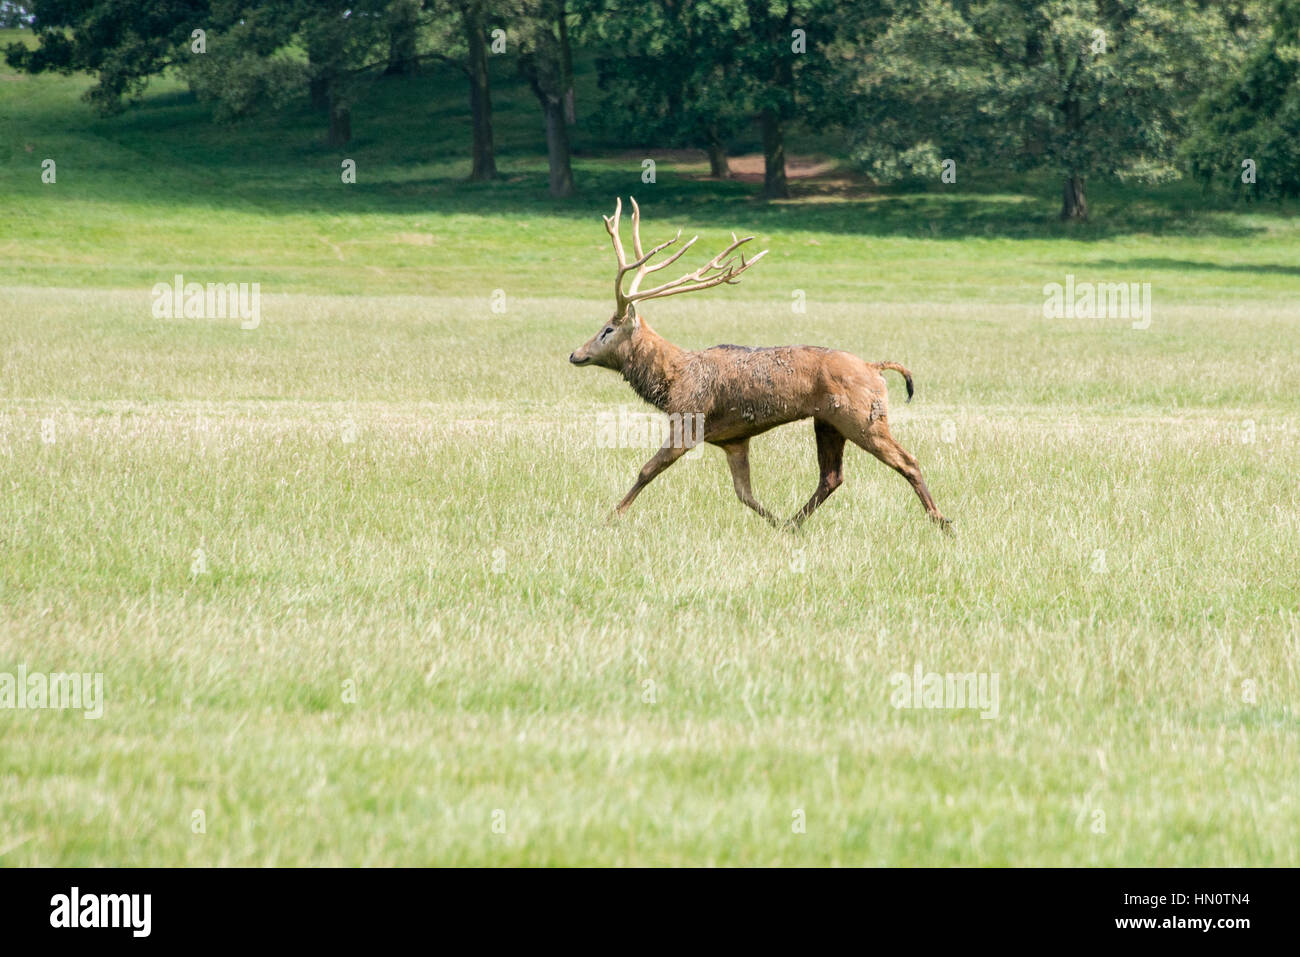 A red deer stag running through a field at Woburn abbey, UK Stock Photo